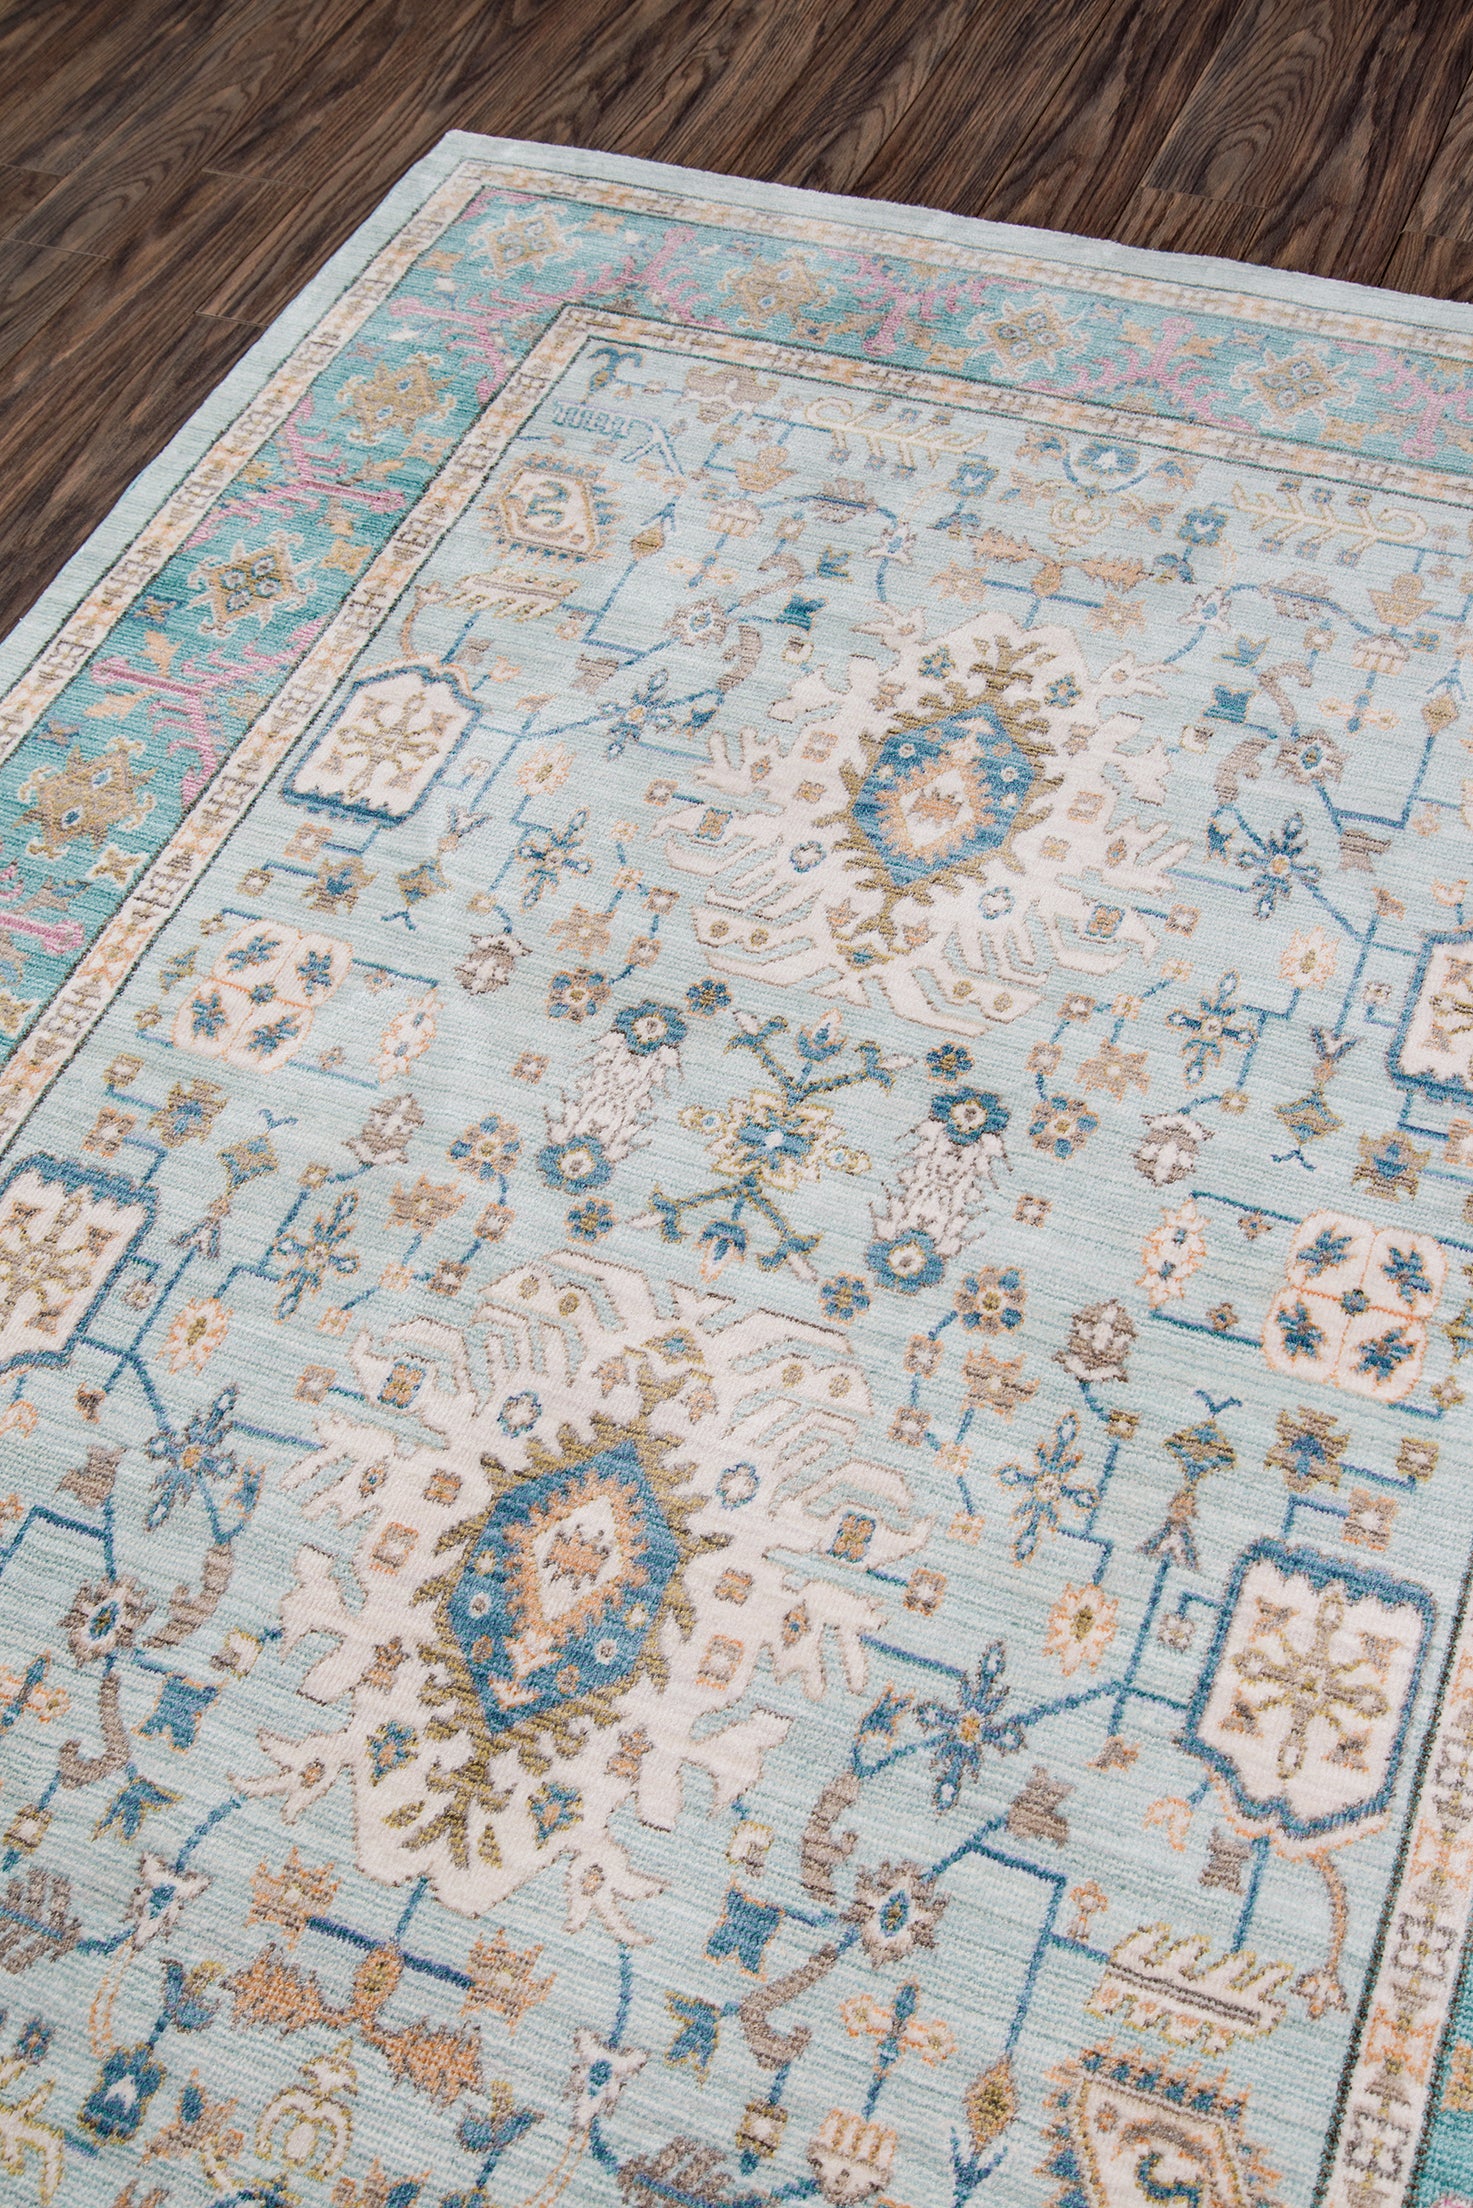 Shabby Chic Area Rugs Woodwaves